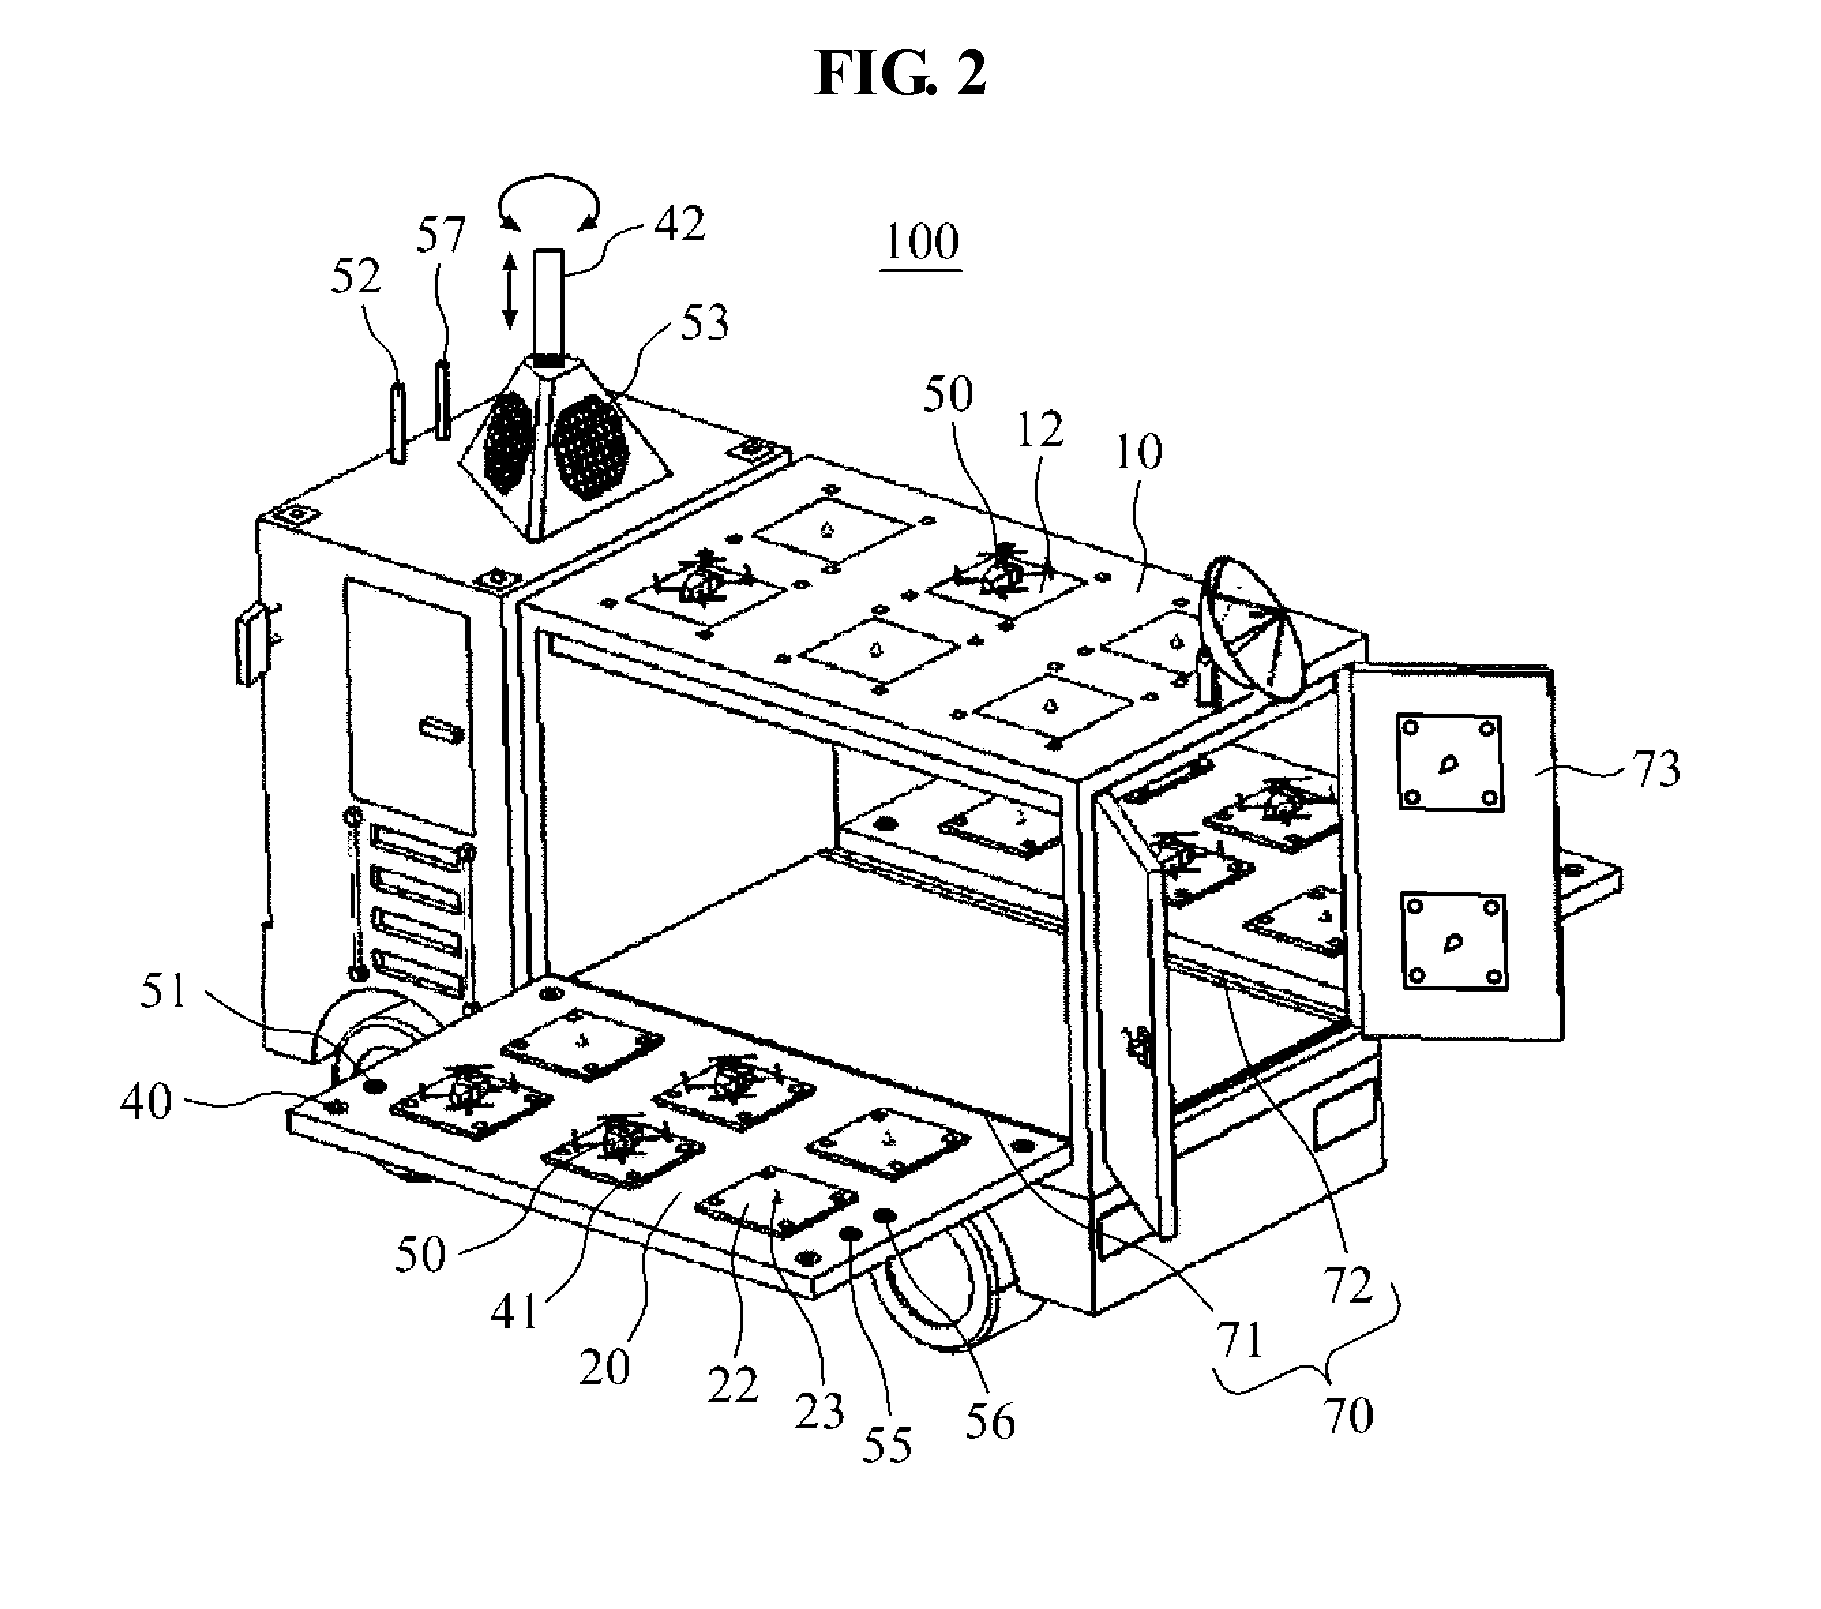 Apparatus and method of charging and housing of unmanned vertical take-off and landing (VTOL) aircraft